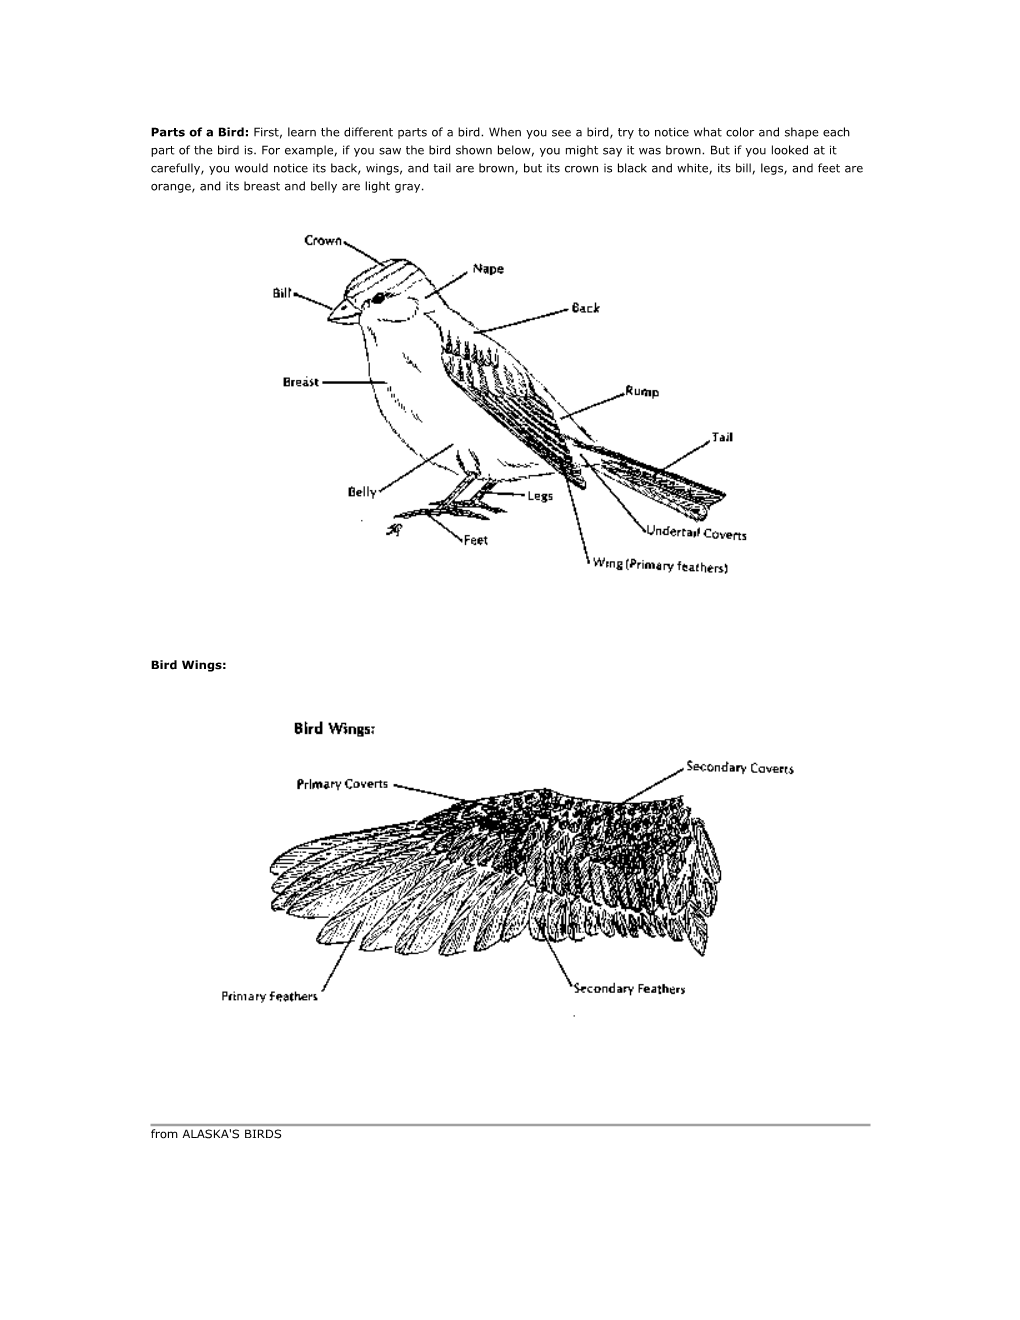 Parts of a Bird: First, Learn the Different Parts of a Bird